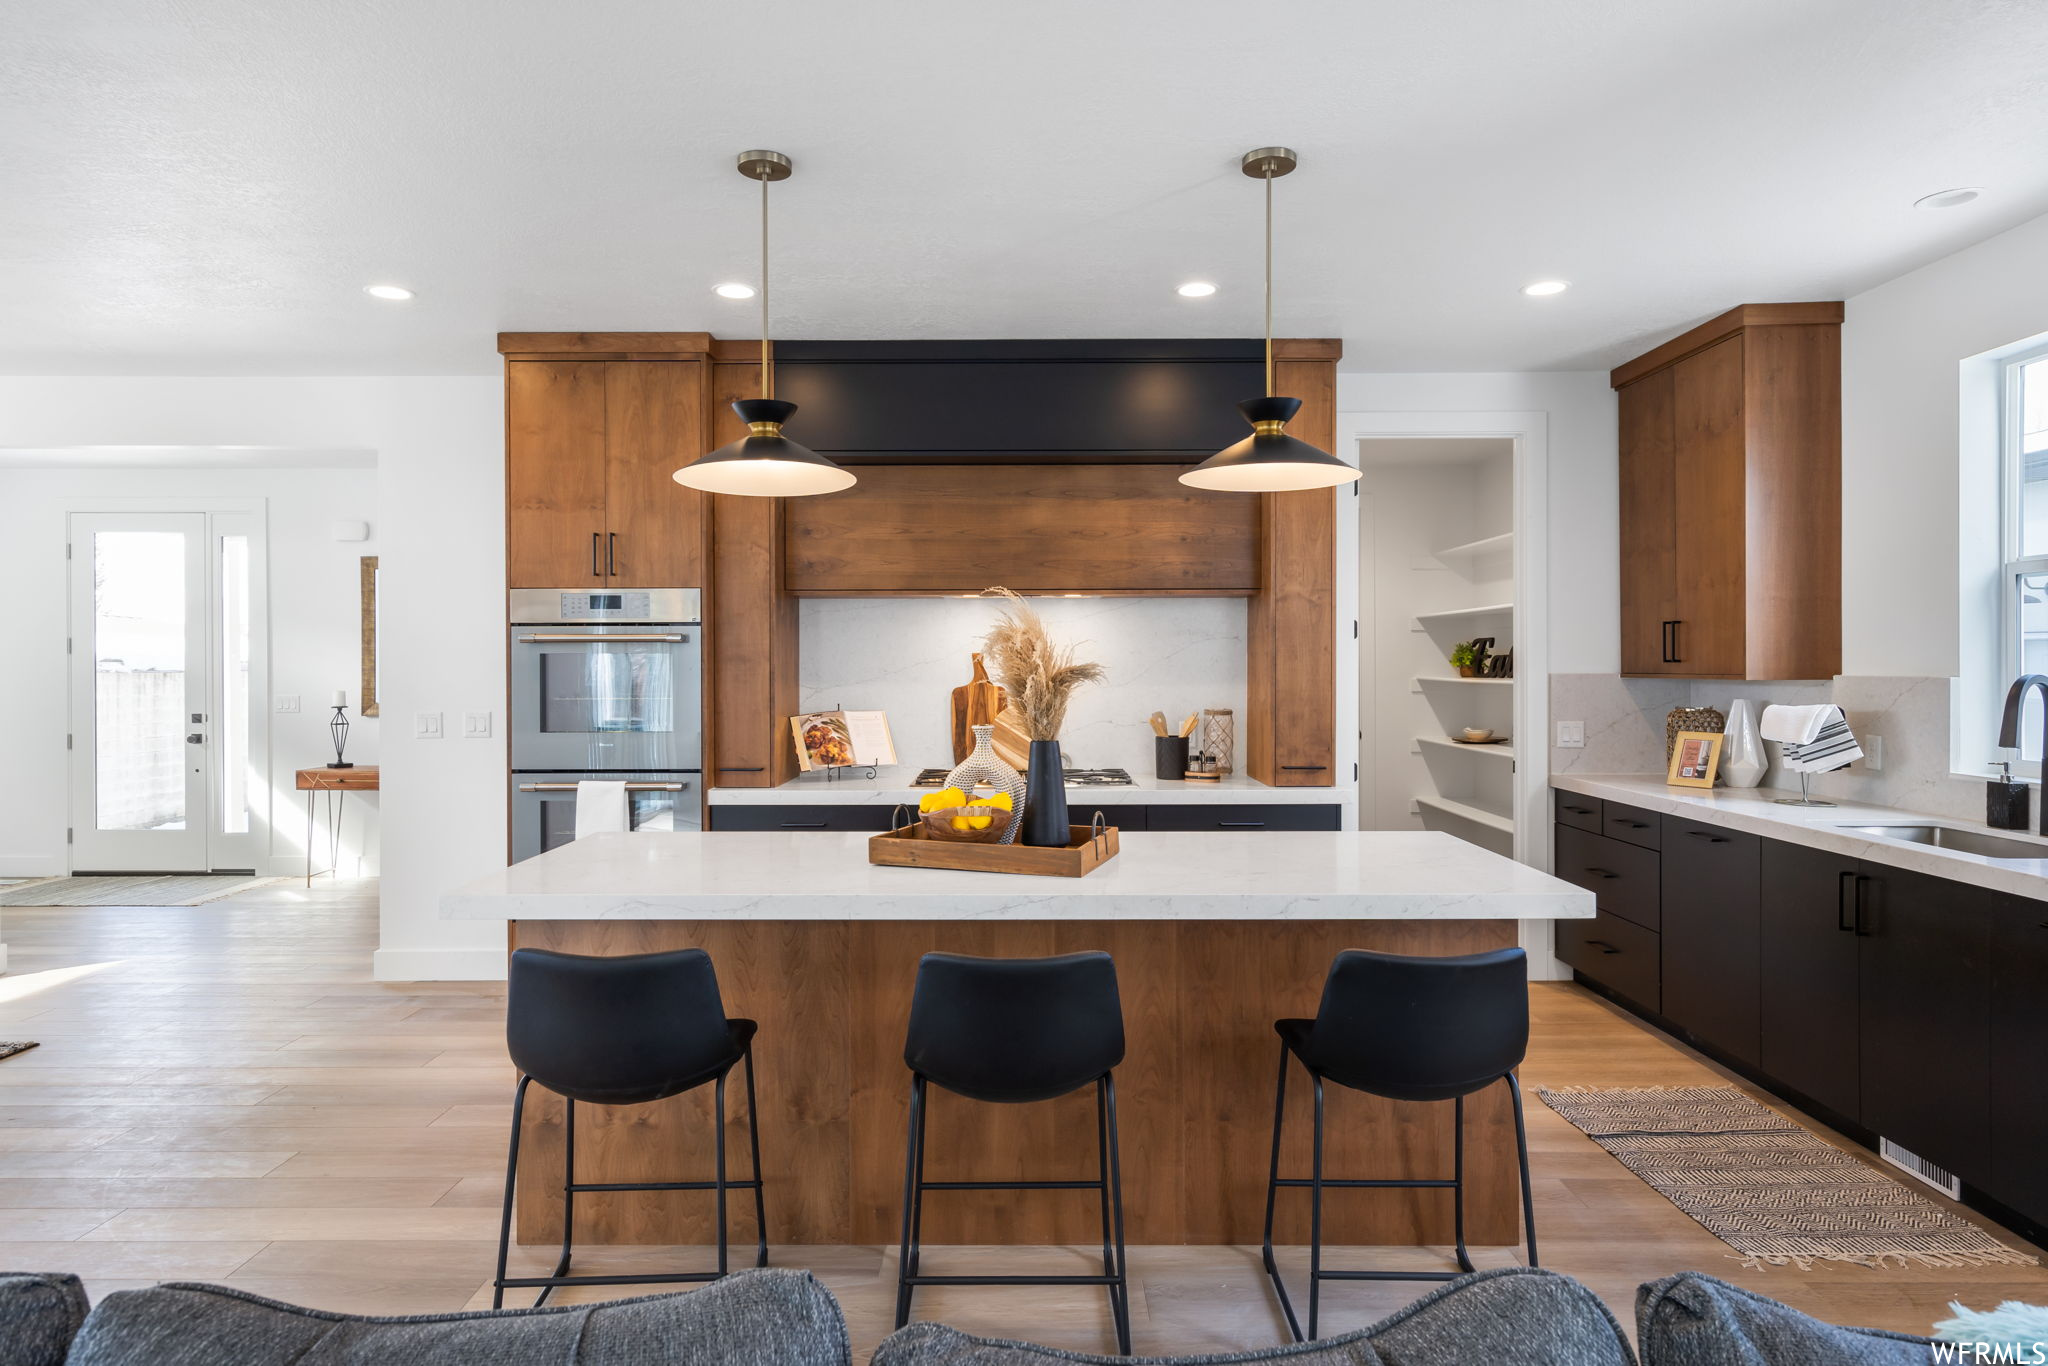 Kitchen featuring a breakfast bar, stainless steel double oven, light parquet floors, light countertops, brown cabinetry, and pendant lighting